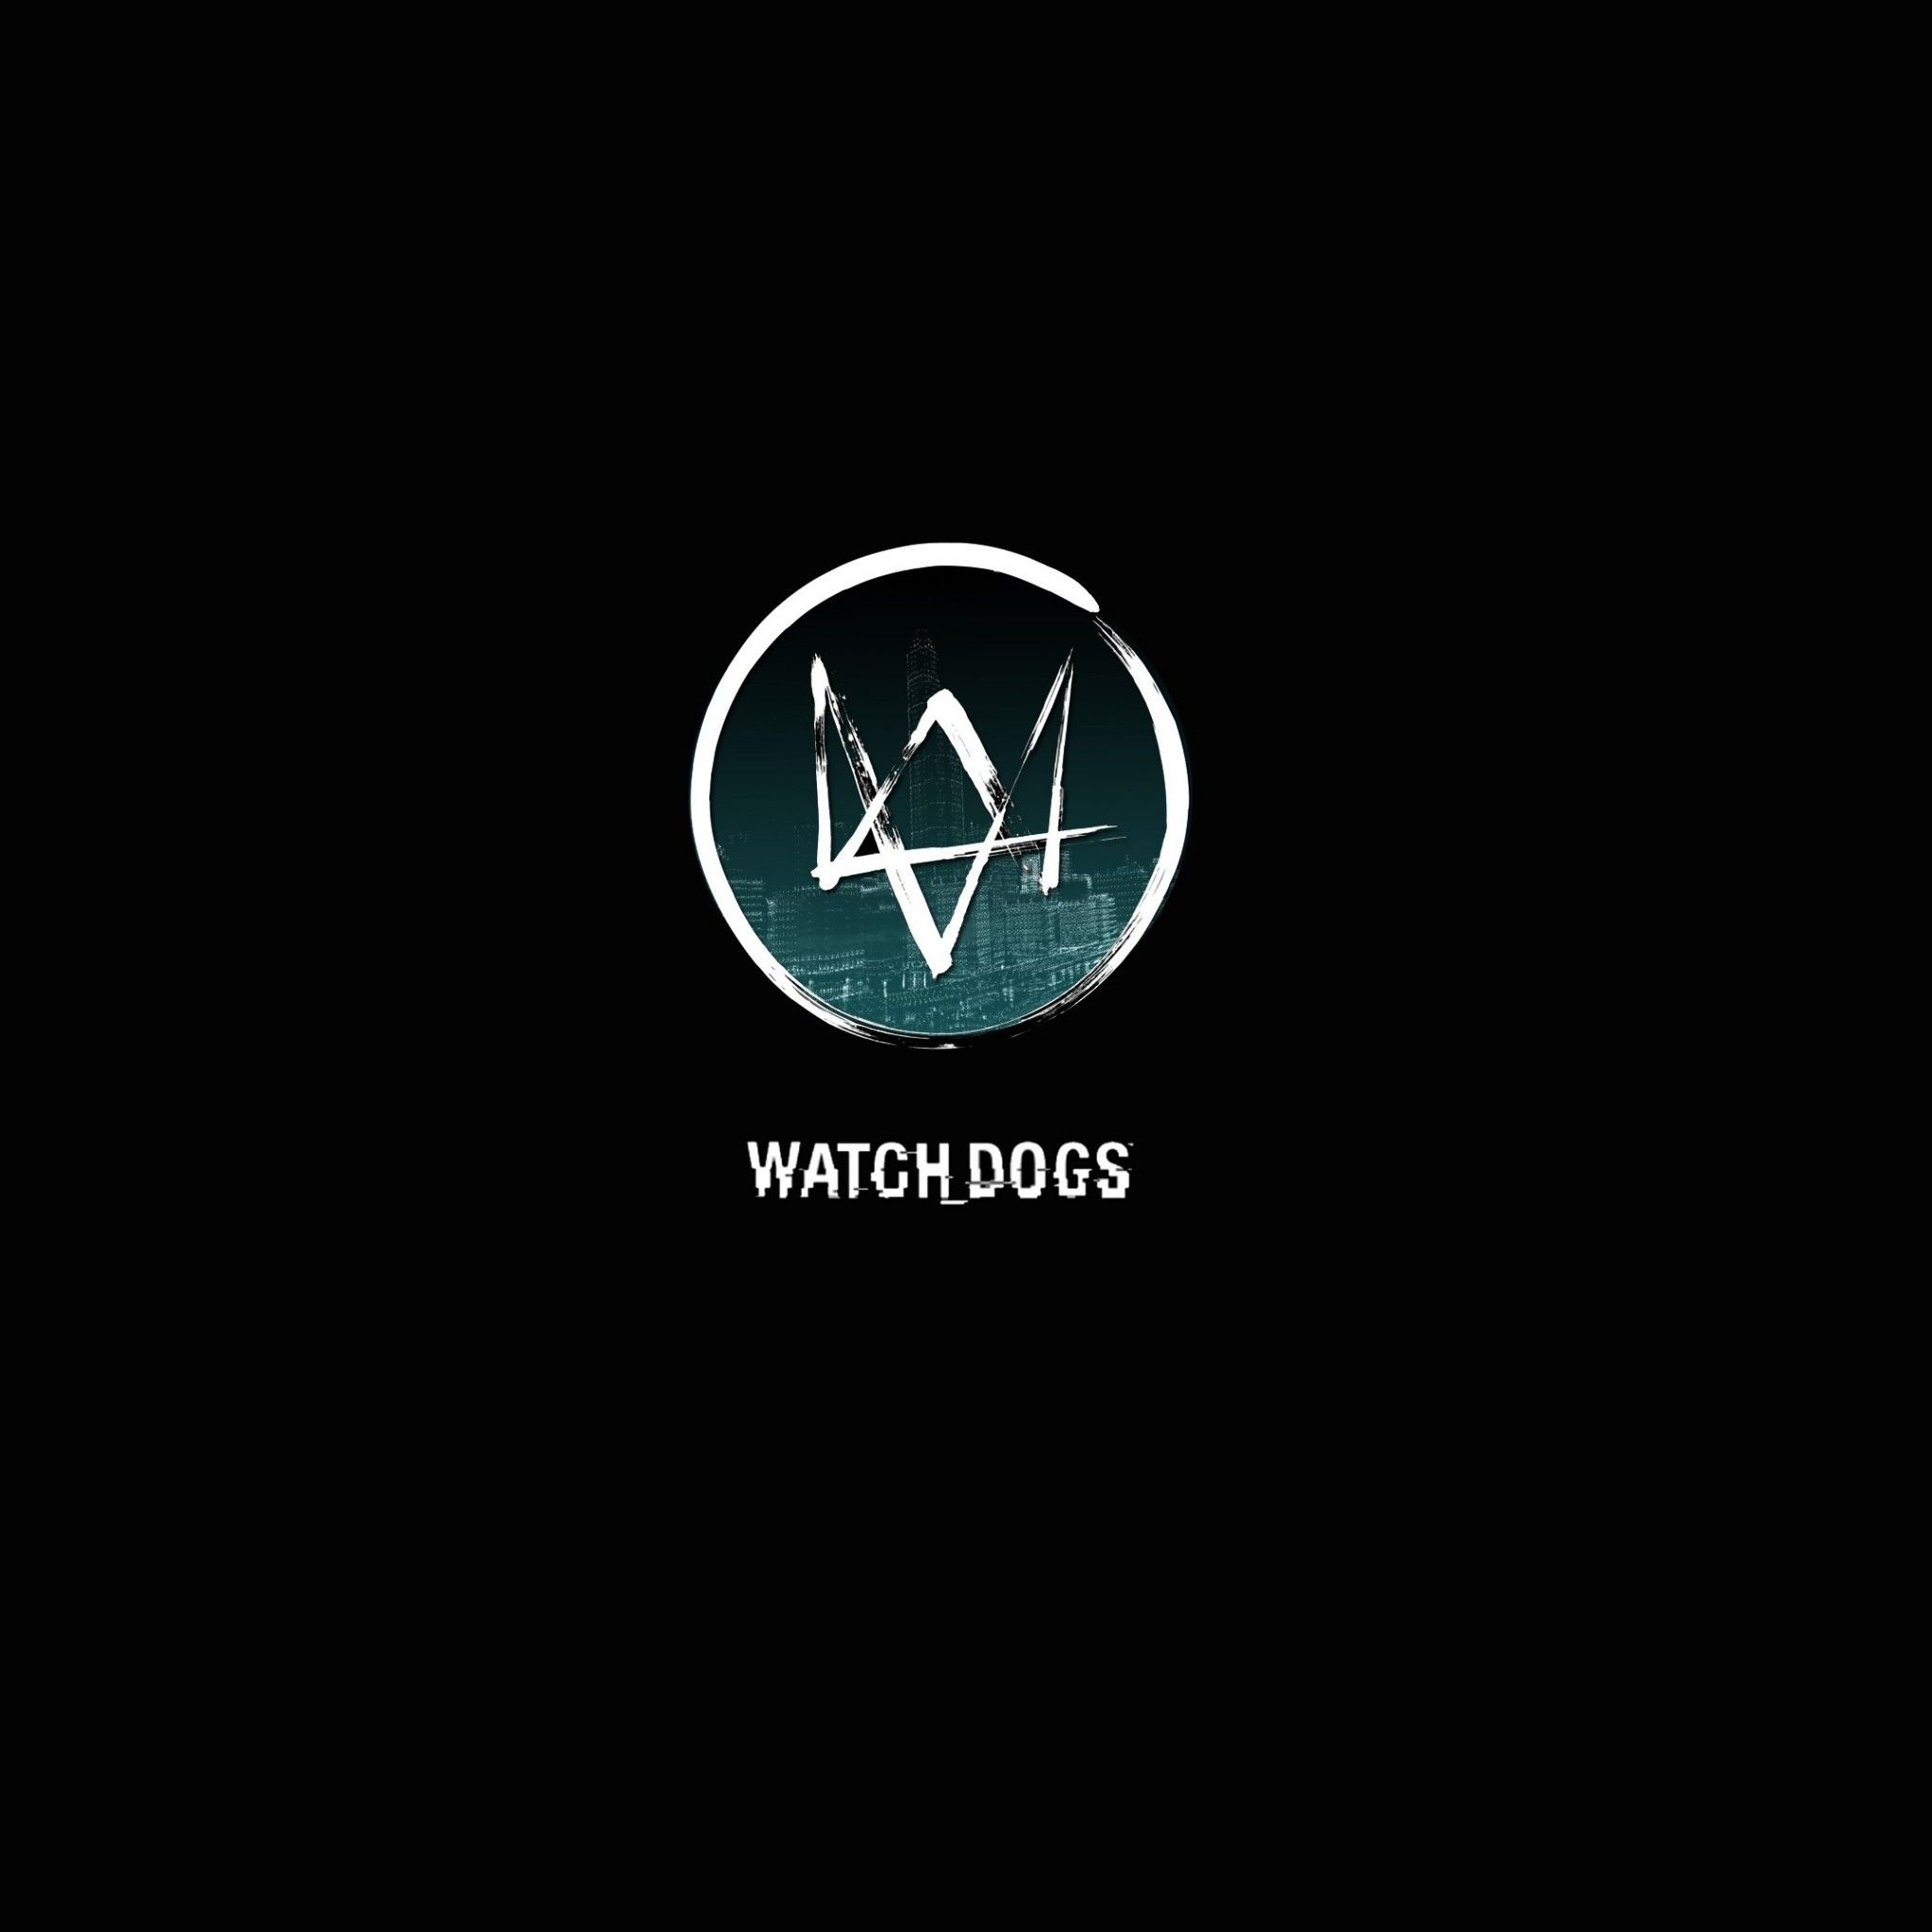 2048x2048 Watch Dogs Logo Wallpapers Top Free Watch Dogs Logo Backgrounds